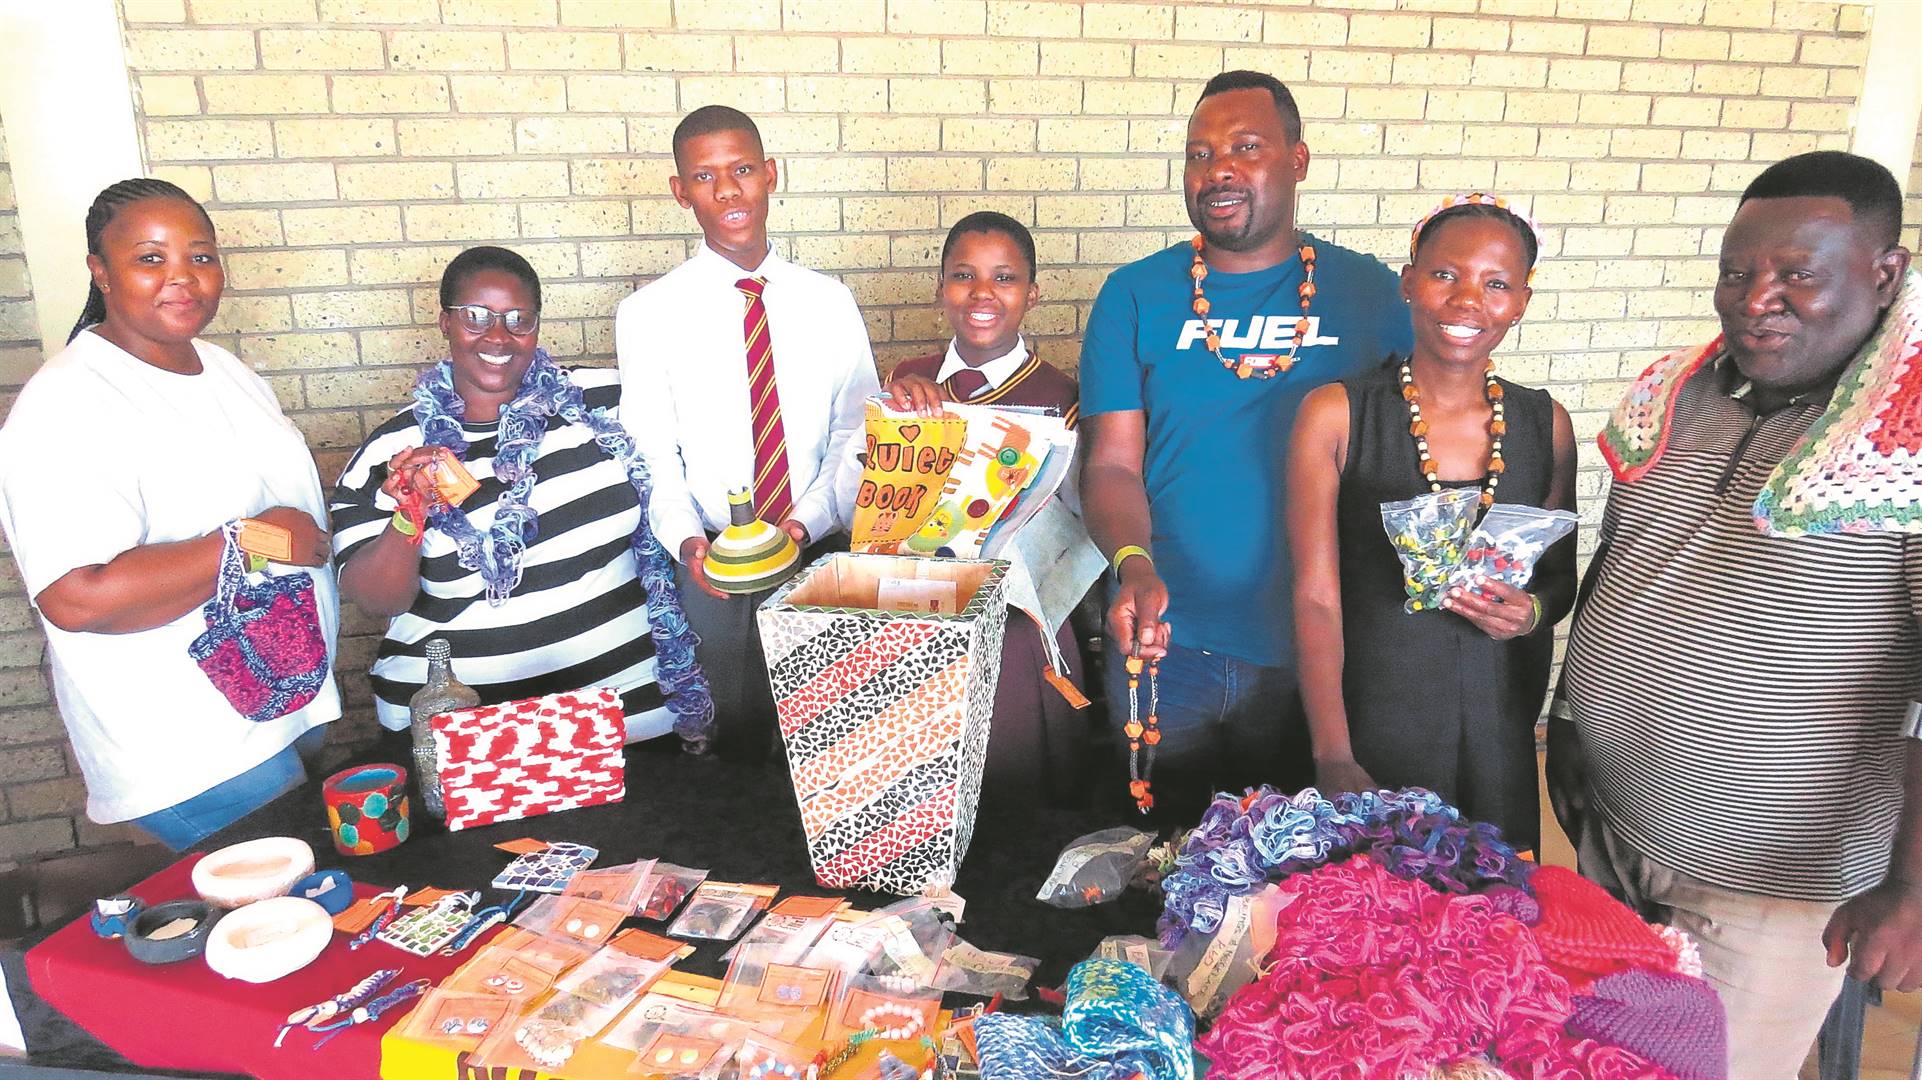 The Pholoho Special School in Bloemfontein continues to showcase its learners’ abilities through a skills training project, with the latest offerings exhibited during the disability awareness campaign held at the Norman Doubell Hall in Heidedal on 23 February. Representatives of the school are from the left: Mosele Mokhele (house supervisor), Dinah Motsumi, Tokologo Modutwane (learner), Palesa Stellenberg (learner), Khathatso Bohloko, Matshediso Phalatsane and Benard Tshabalala. Learners produce a range of contemporary handcrafted items, jewelry like necklaces and earrings, beads, as well as household items such as flower pots.Photo: Teboho Setena